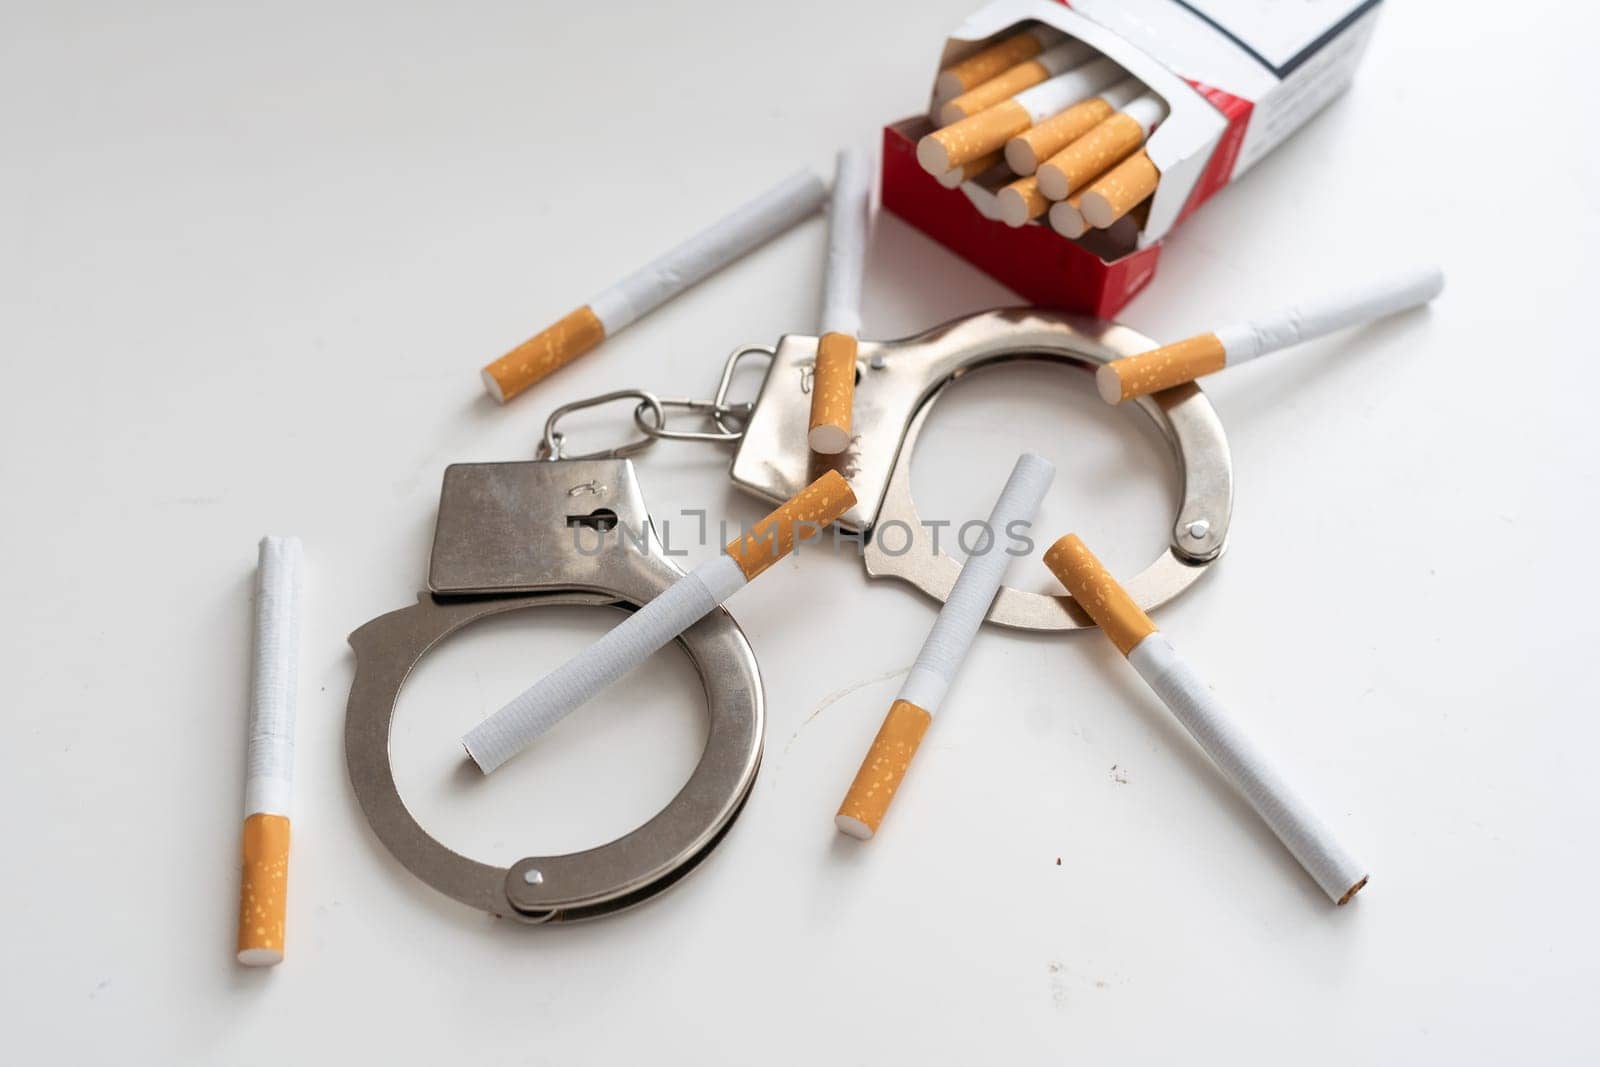 Cigarette tobacco nicotine habit - Stop smoking, isolated on white background by Andelov13